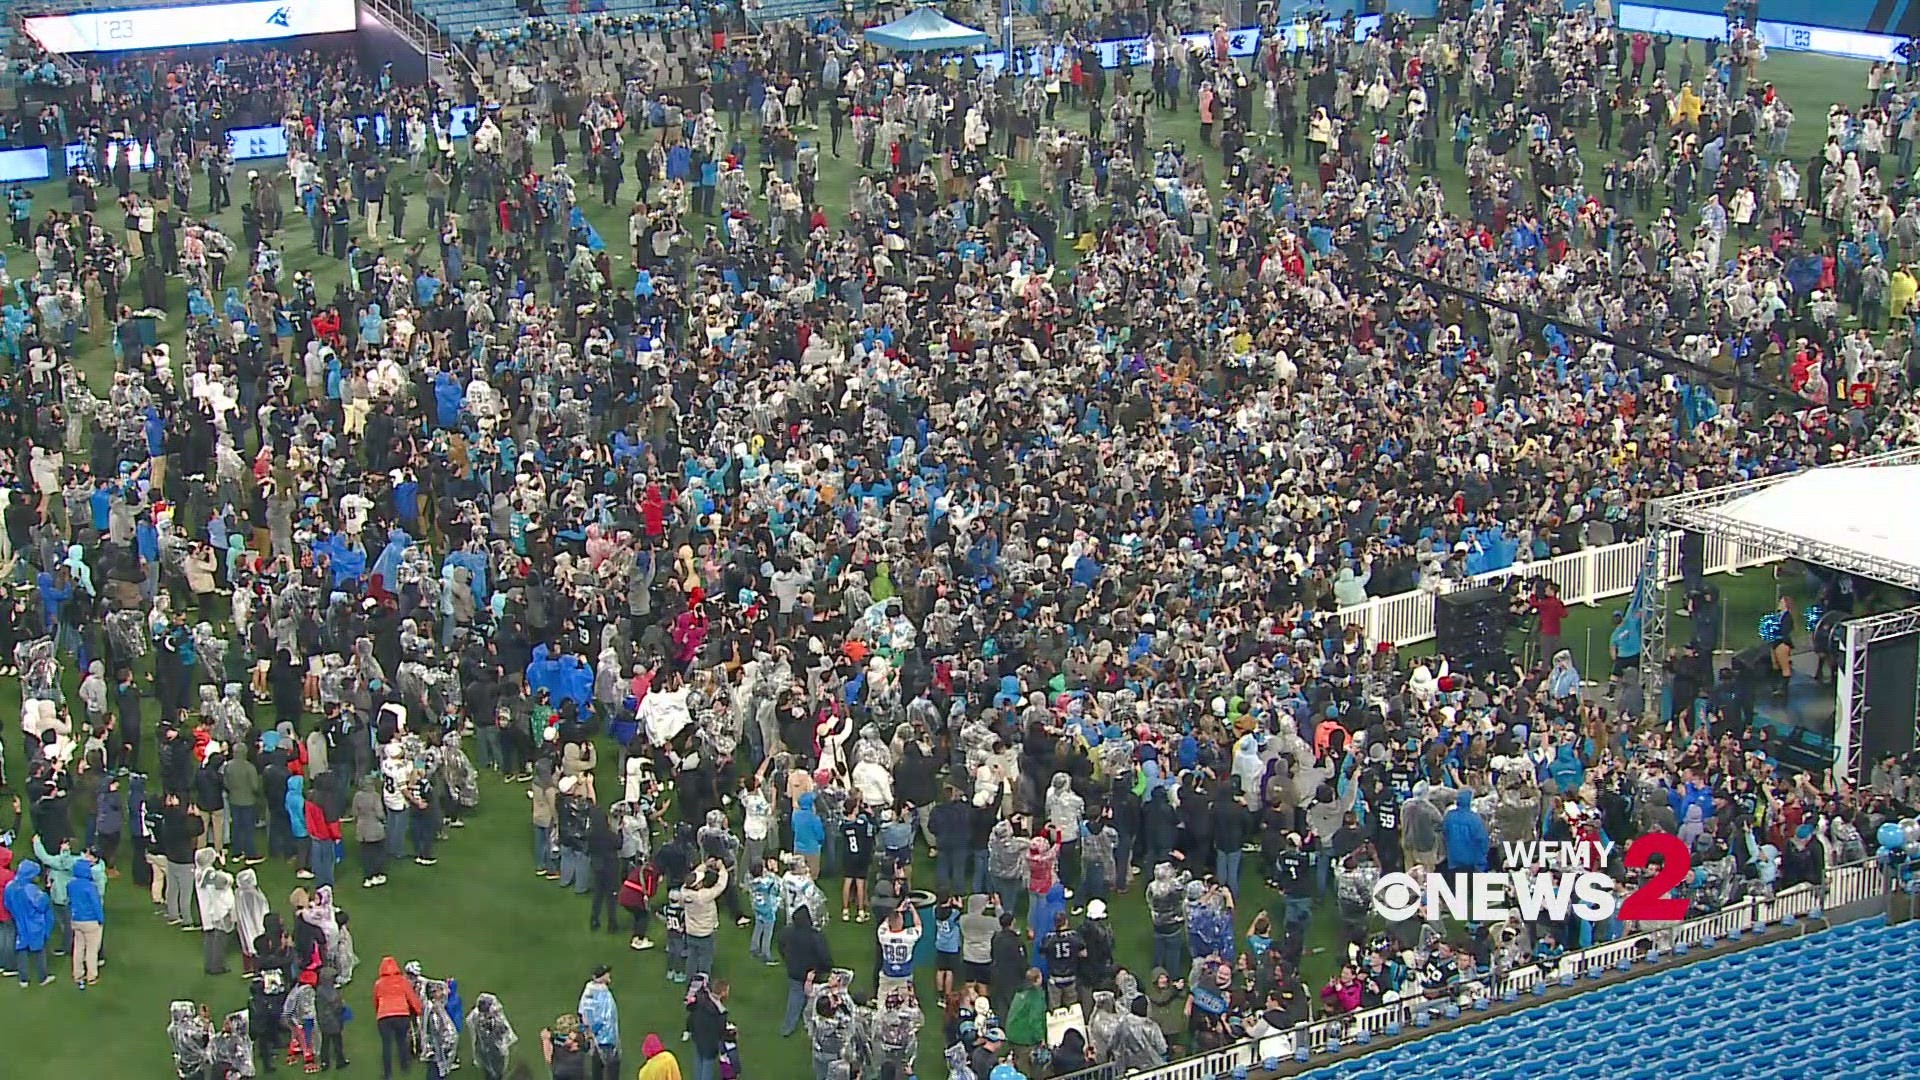 Carolina Panthers fans react to Bryce Young being selected as No. 1 draft pick in 2023 NFL Draft at Bank of America Stadium in Charlotte.